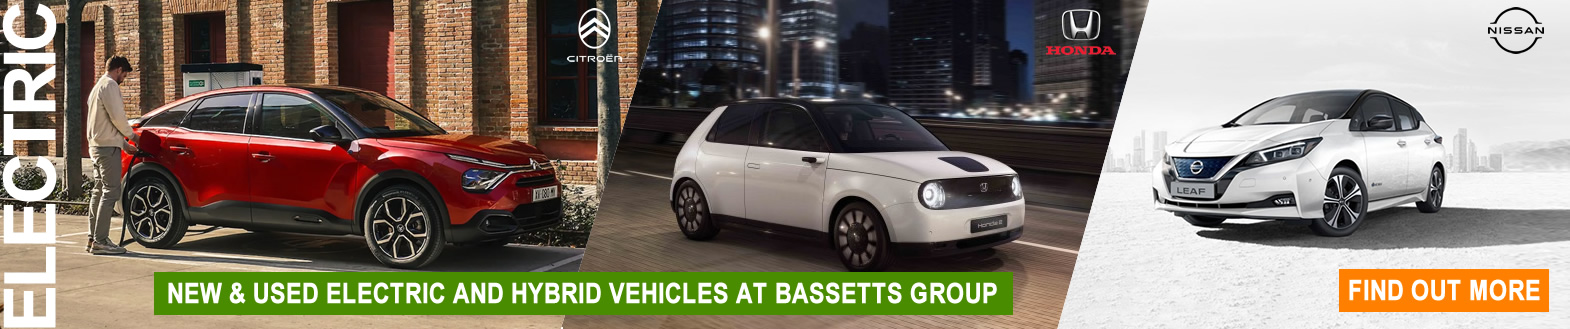 Electric vehicles at Bassetts Motor Group